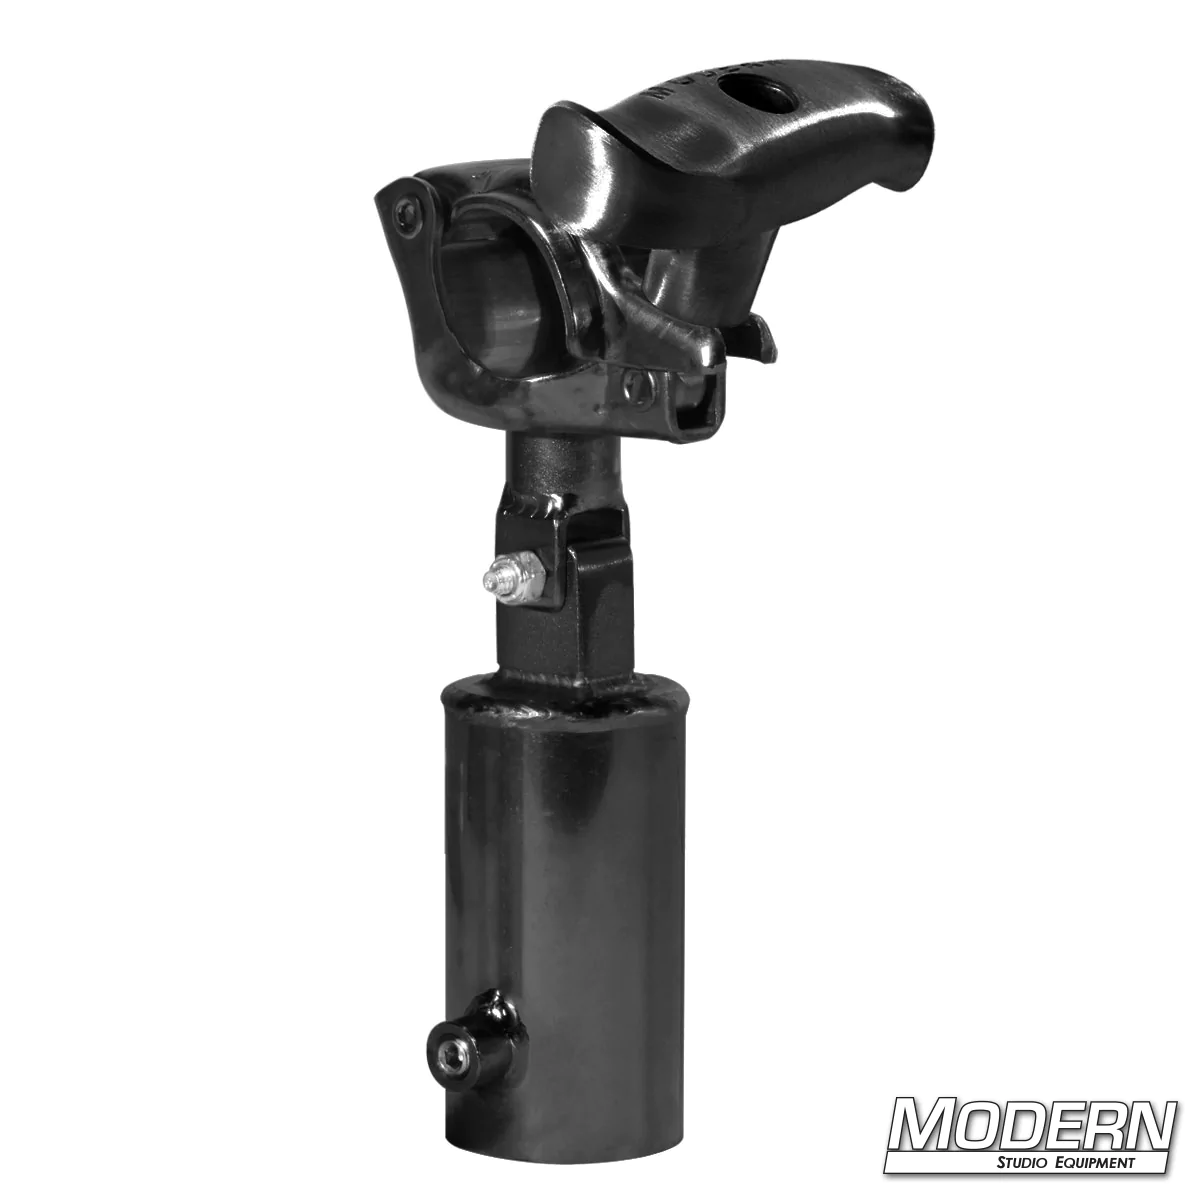 Grid Clamp with Swivel 1-1/4" Speed-Rail® Receiver - Black Zinc with Spin Handle